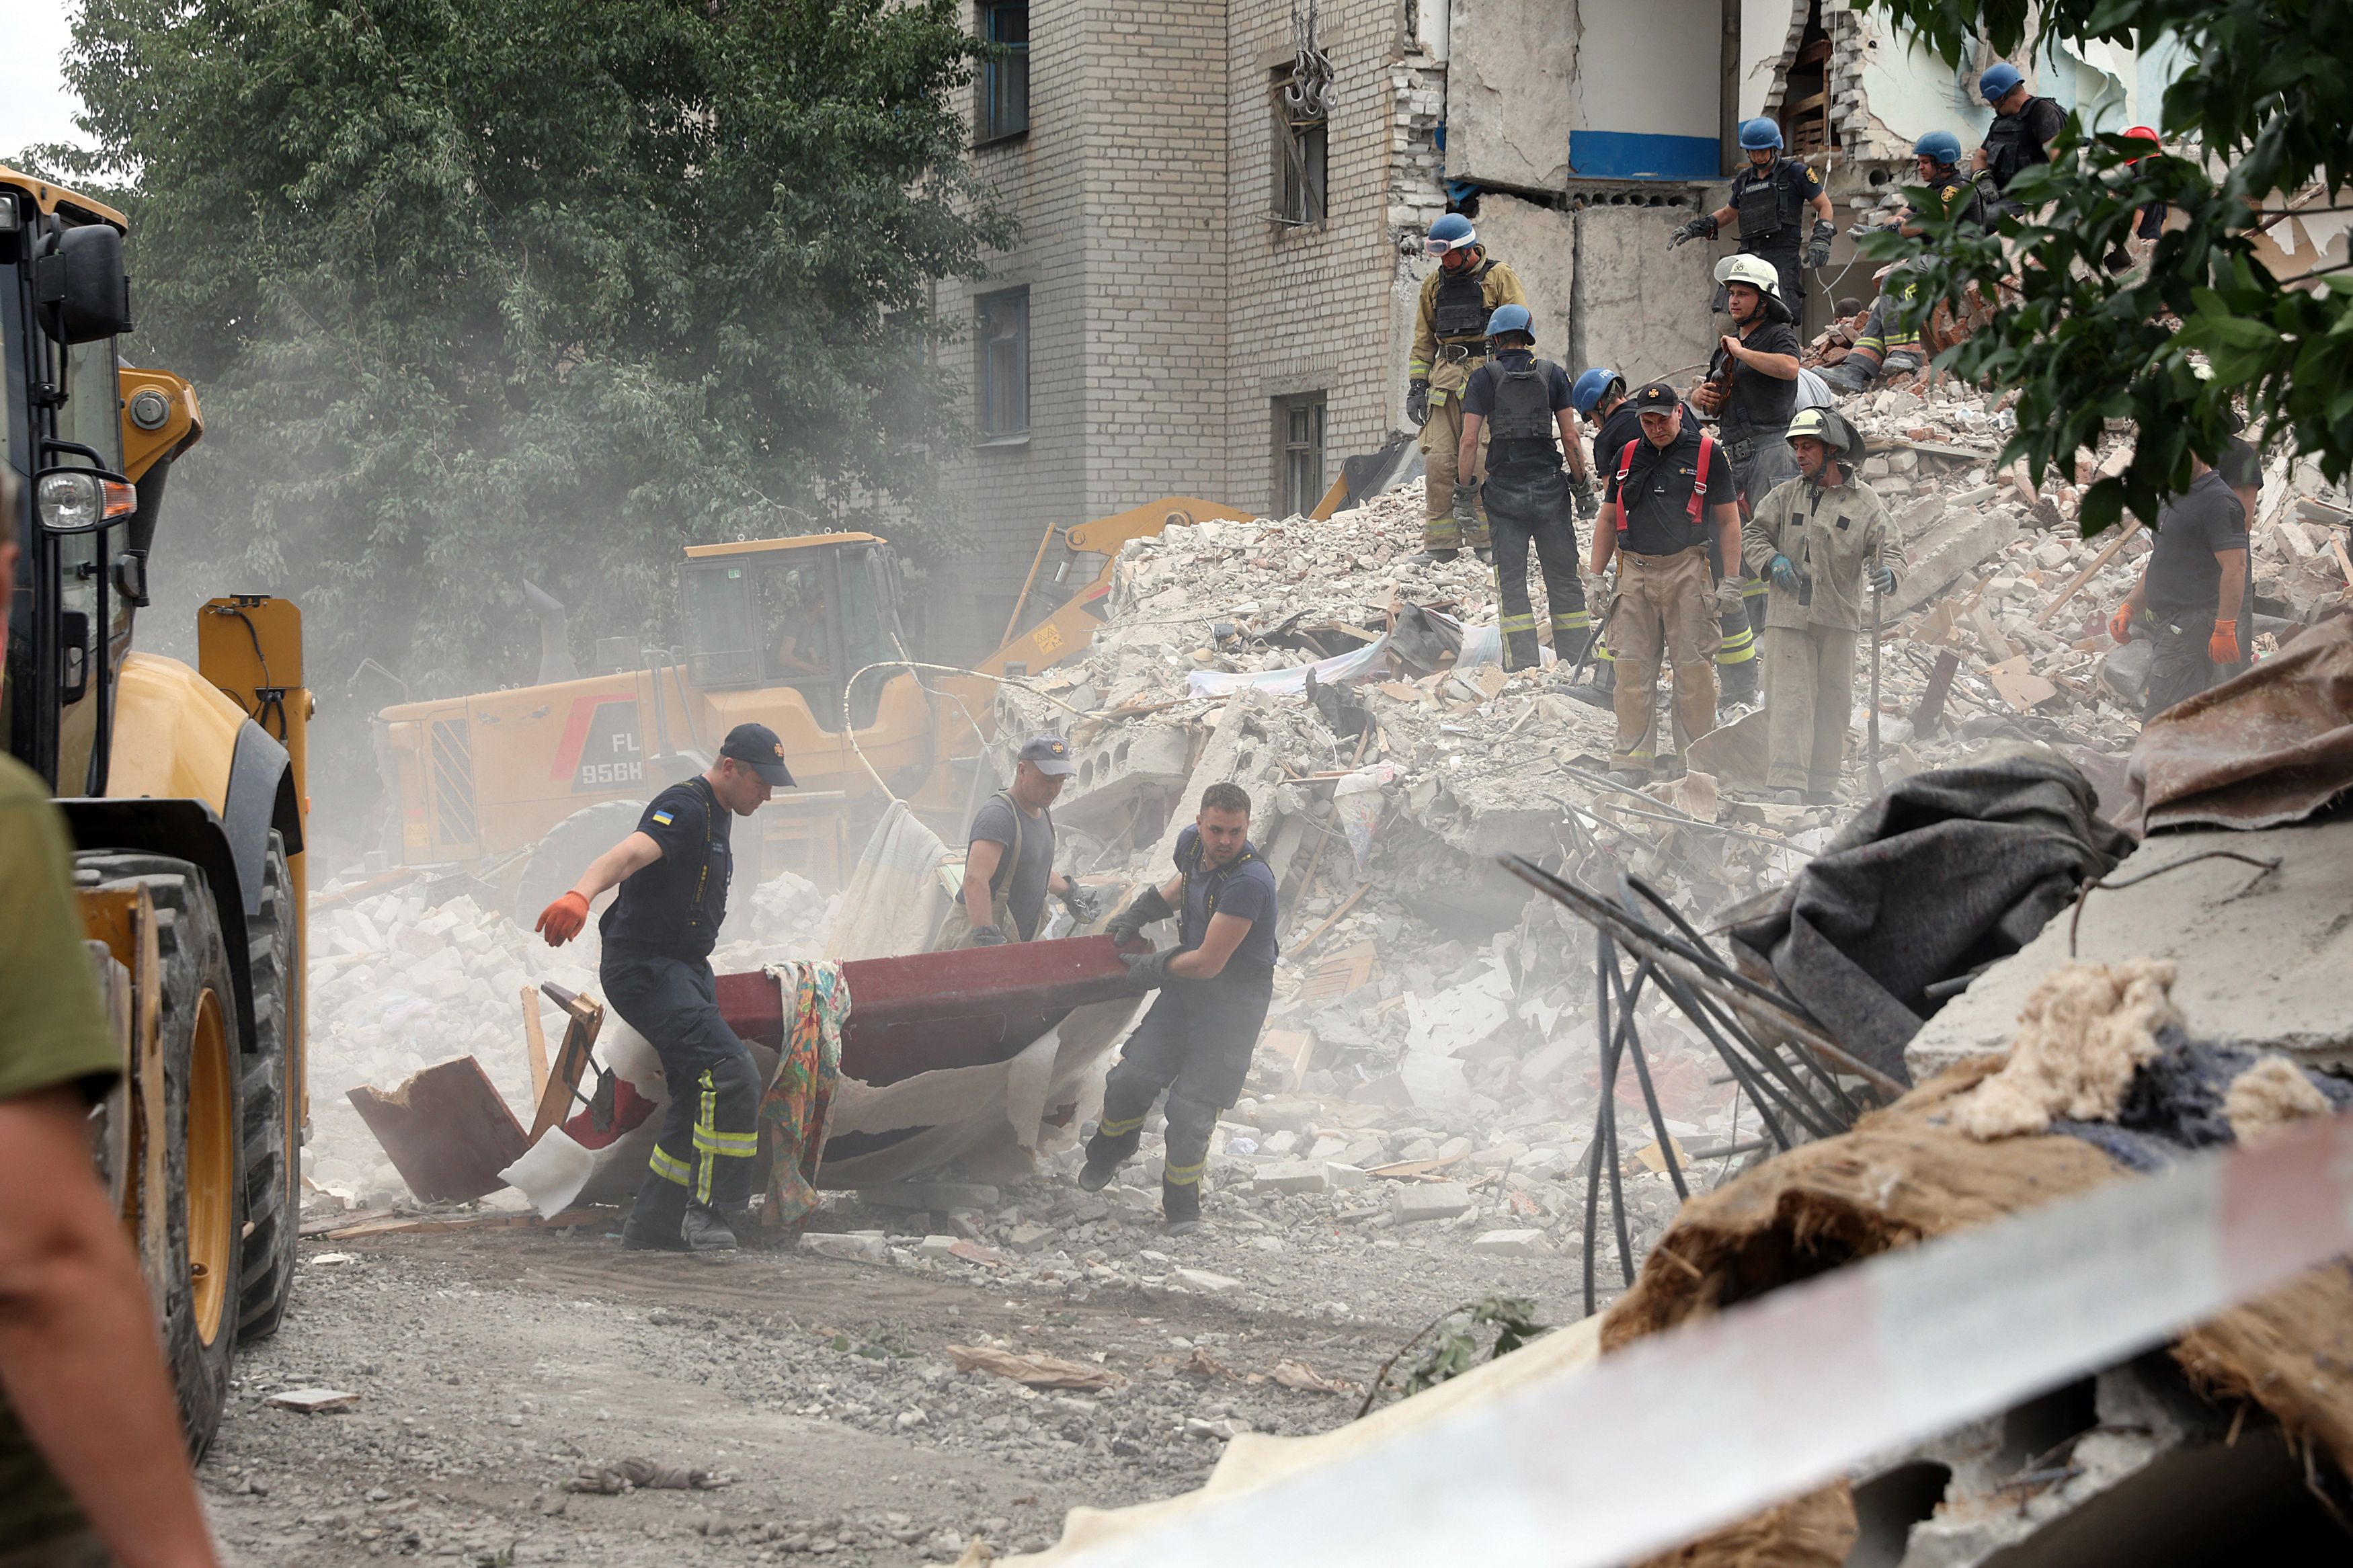 Rescuers clear the scene on Sunday after shelling in the eastern town of Chasiv Yar